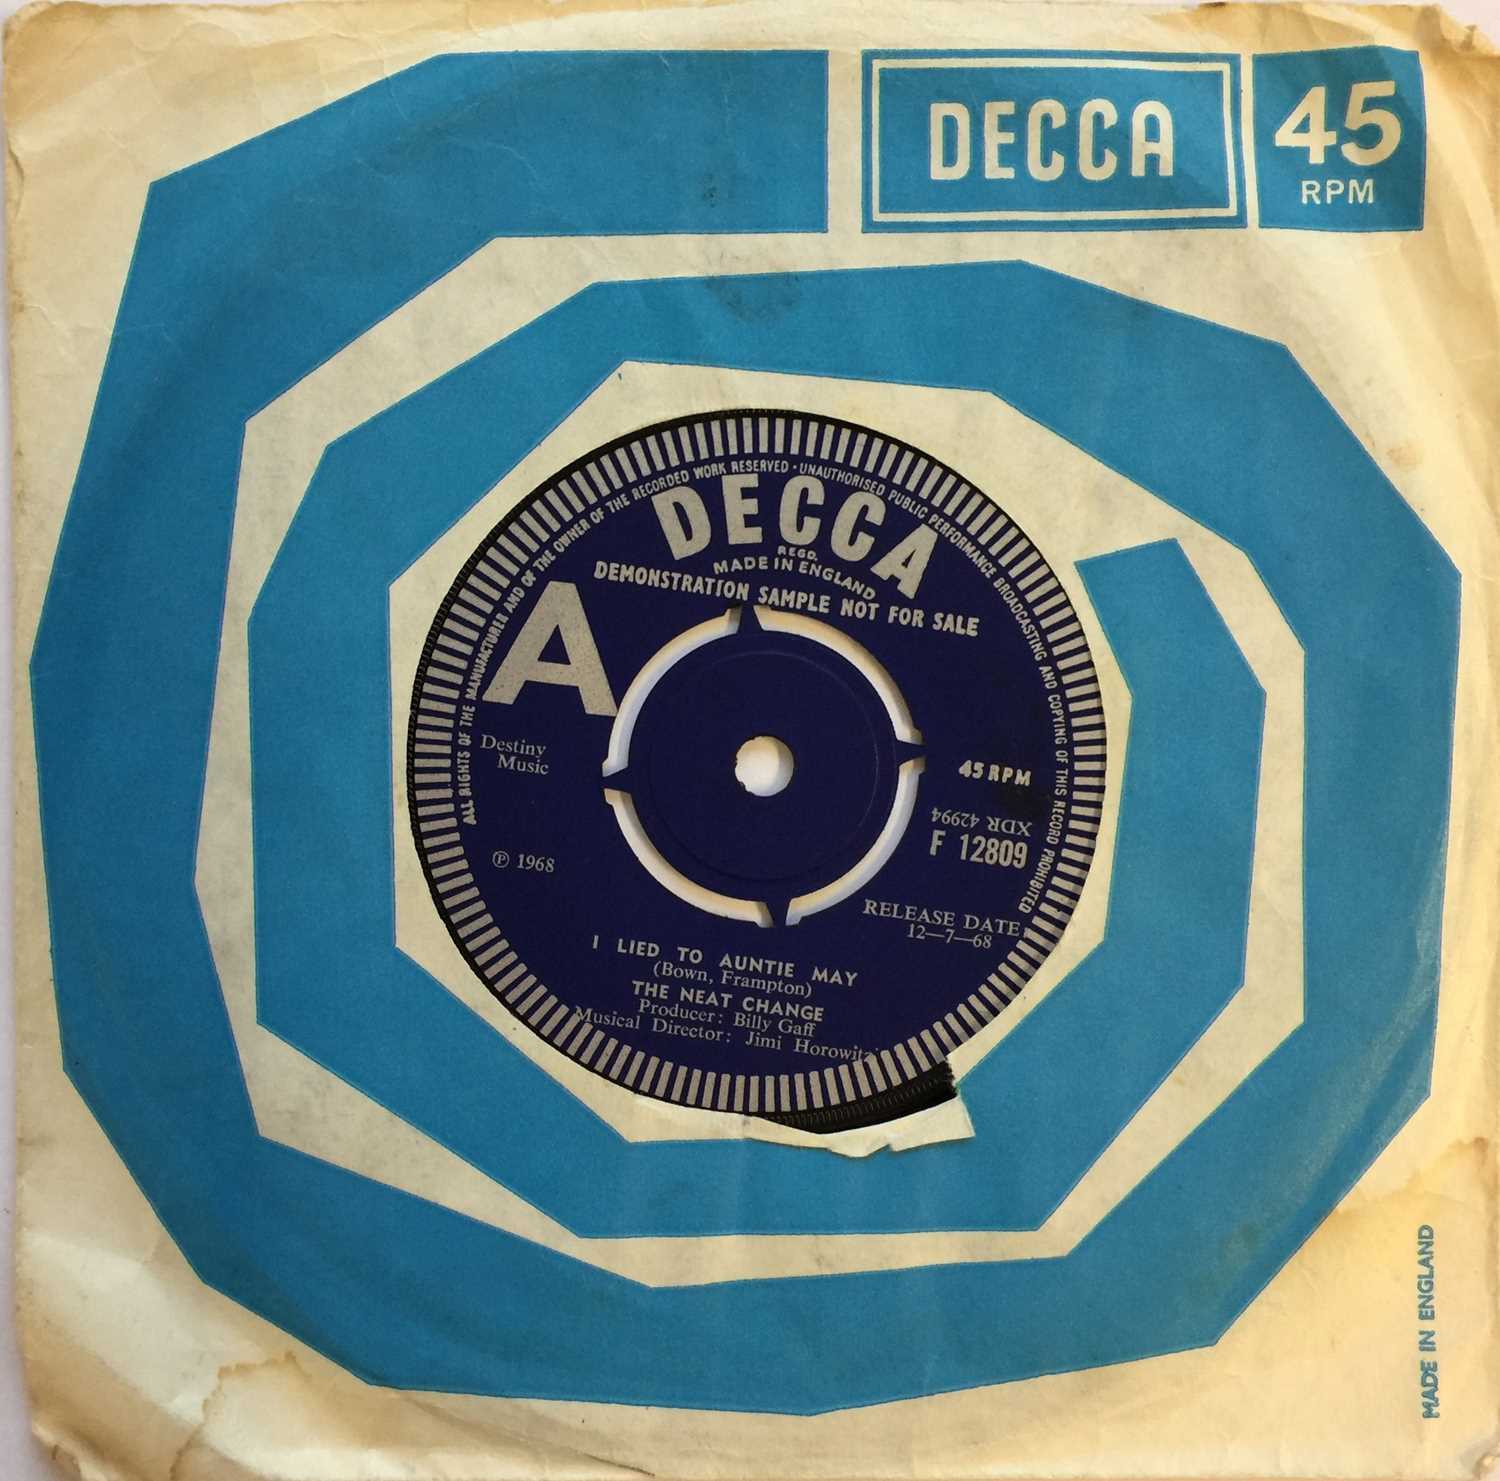 Lot 71 - THE NEAT CHANGE - I LIED TO AUNTIE MAY 7" (ORIGINAL UK DEMO - DECCA F 12809)